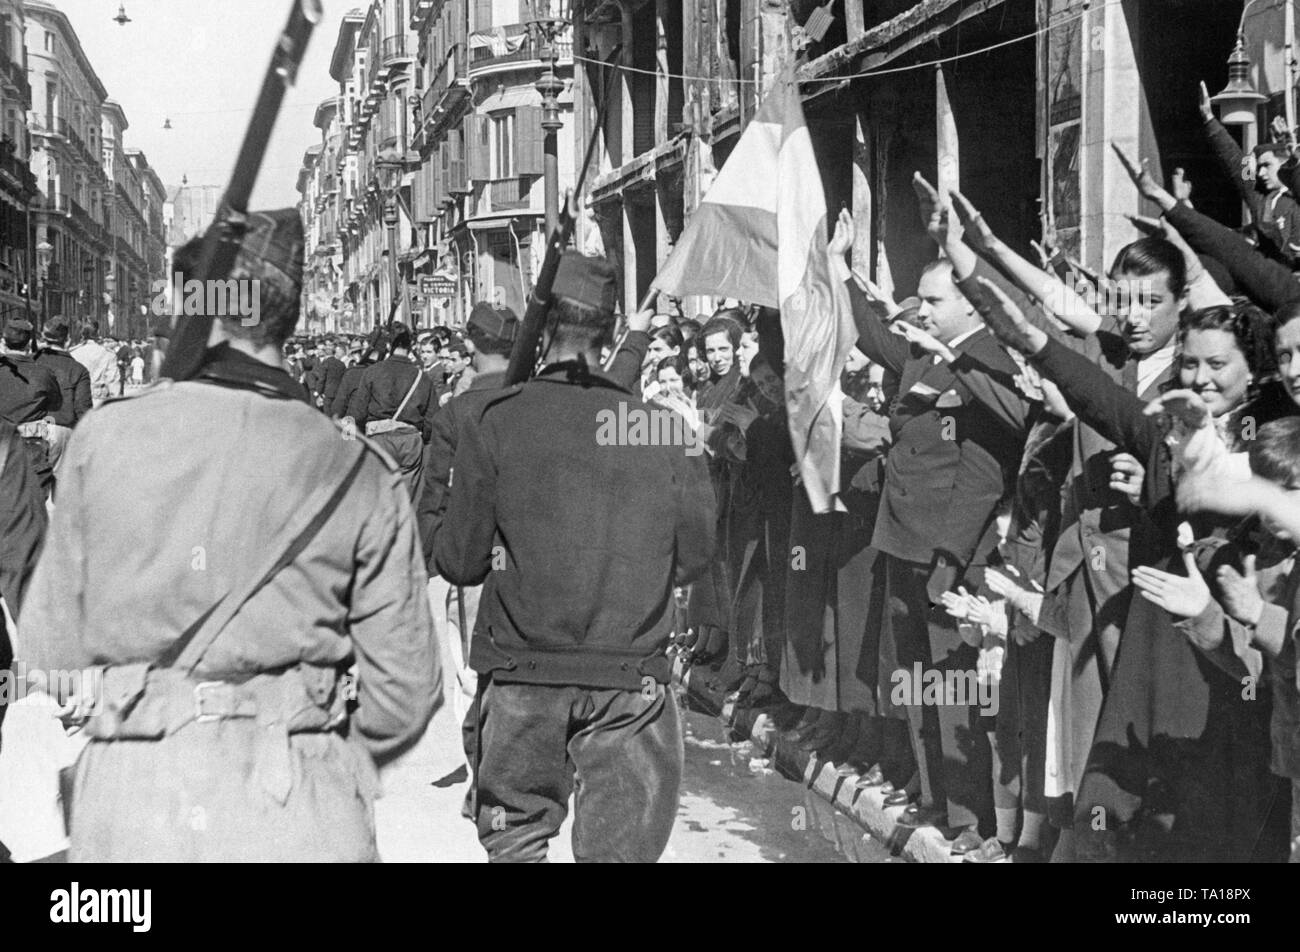 Photo of non-regular Spanish national units and city-dwellers during the invasion of Calle Marques de Larios, the main sales-street in Malaga on February 8, 1937. The fighters wear civilian clothes, military Gorillo cap, shoulder carabiners and Spanish national flags. The inhabitants of Malaga give the fascist salute on the right on the pavement. Stock Photo